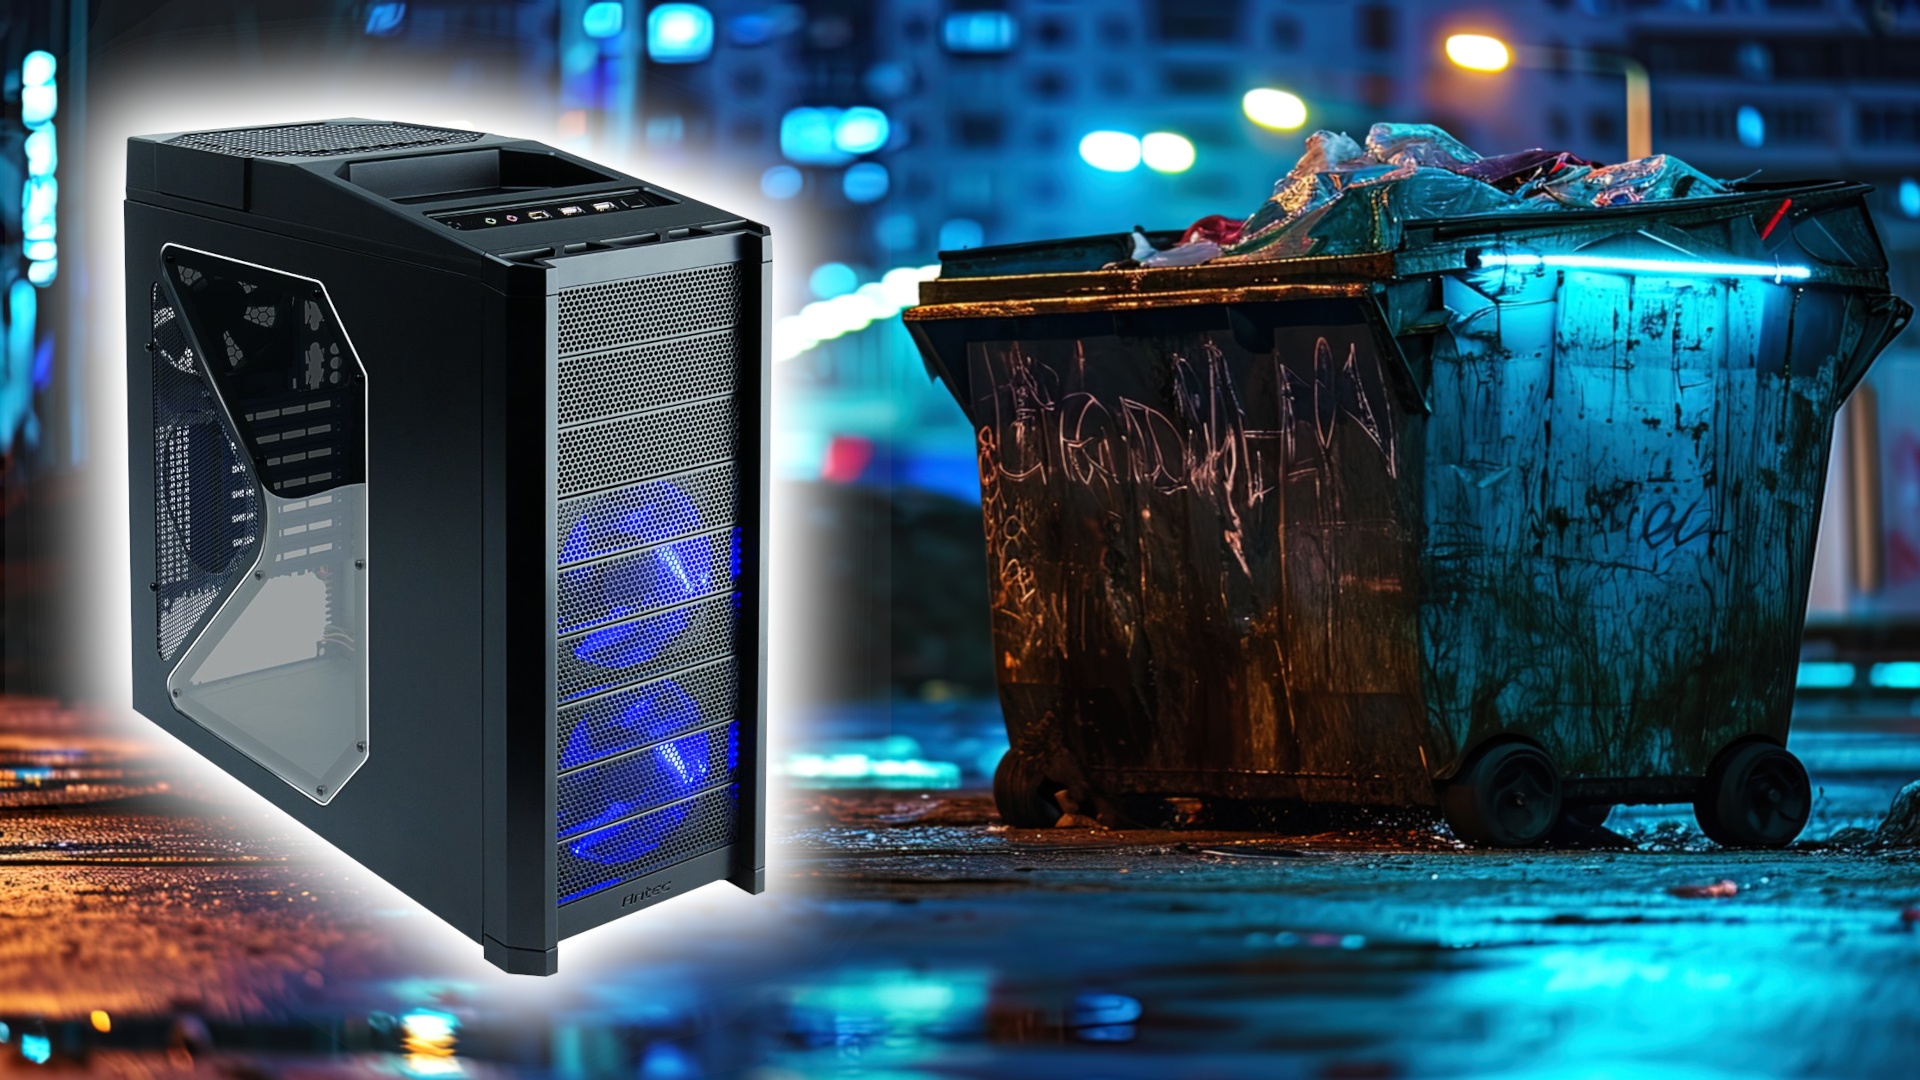 “Is it worth digging through the trash for this?”  – A gamer finds an abandoned gaming PC that makes the hearts of many in the community beat faster